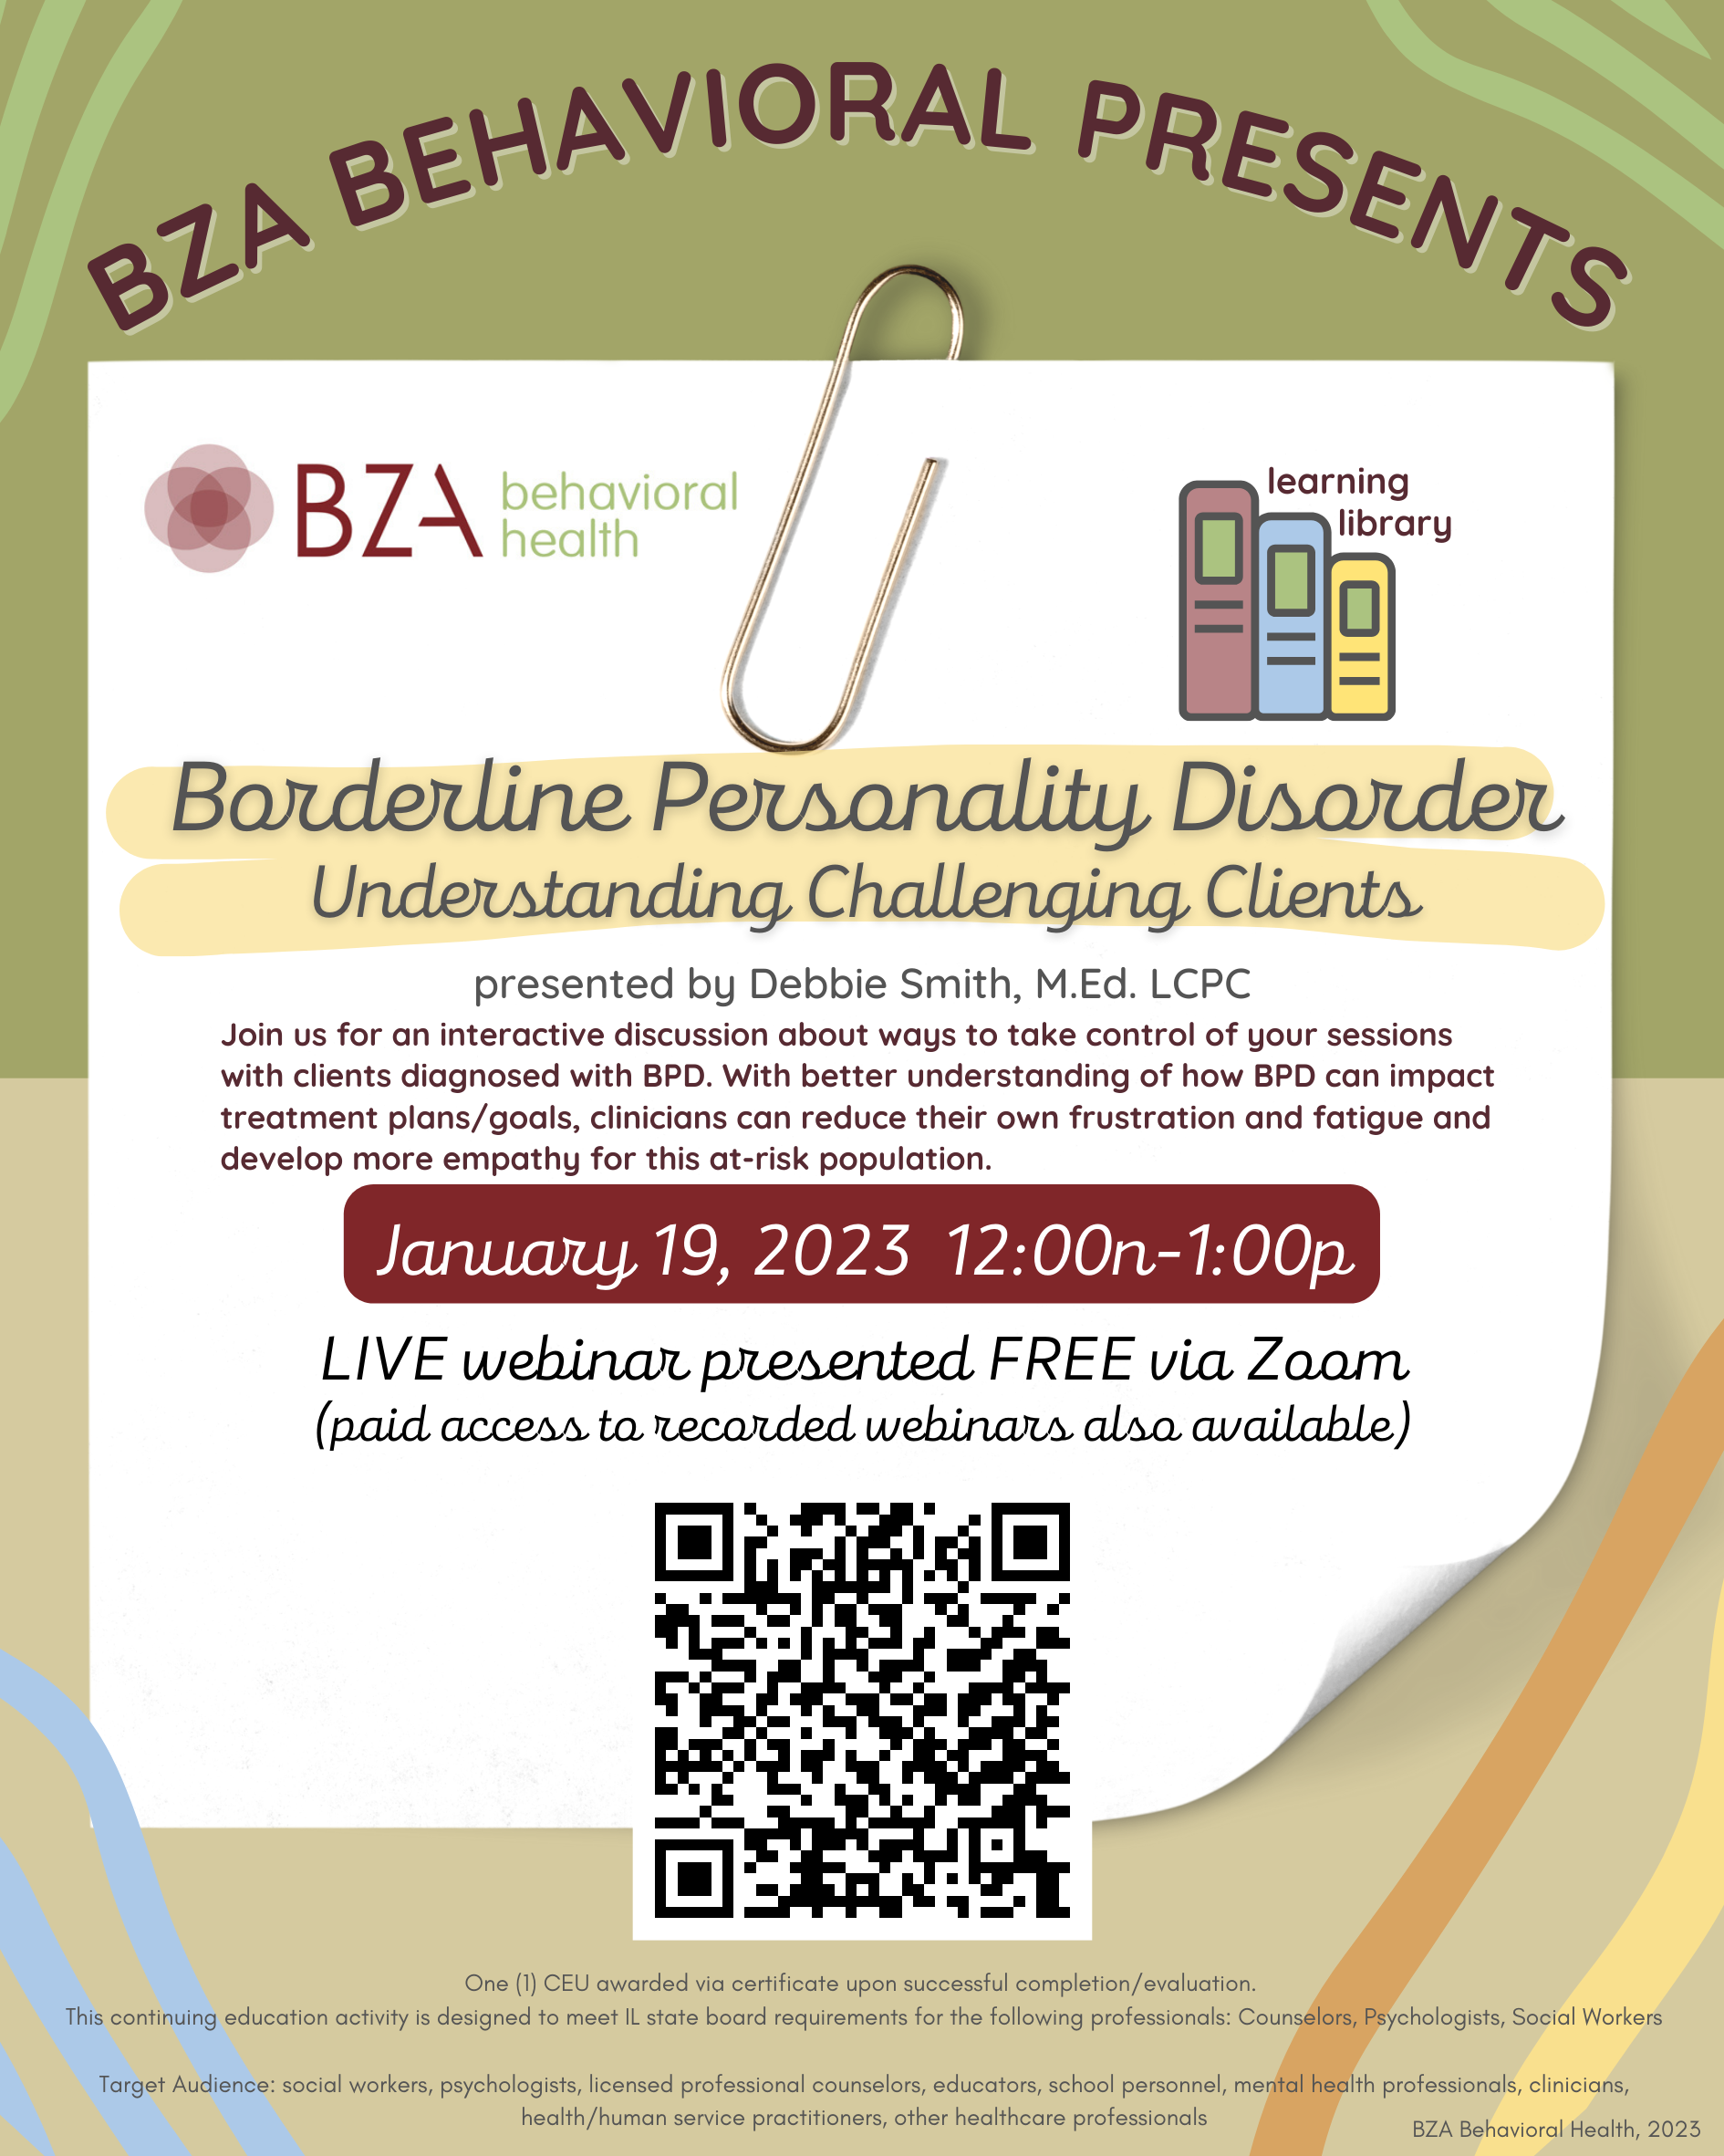 BZA Behavioral Health Comprehensive Wellness, Counseling, and